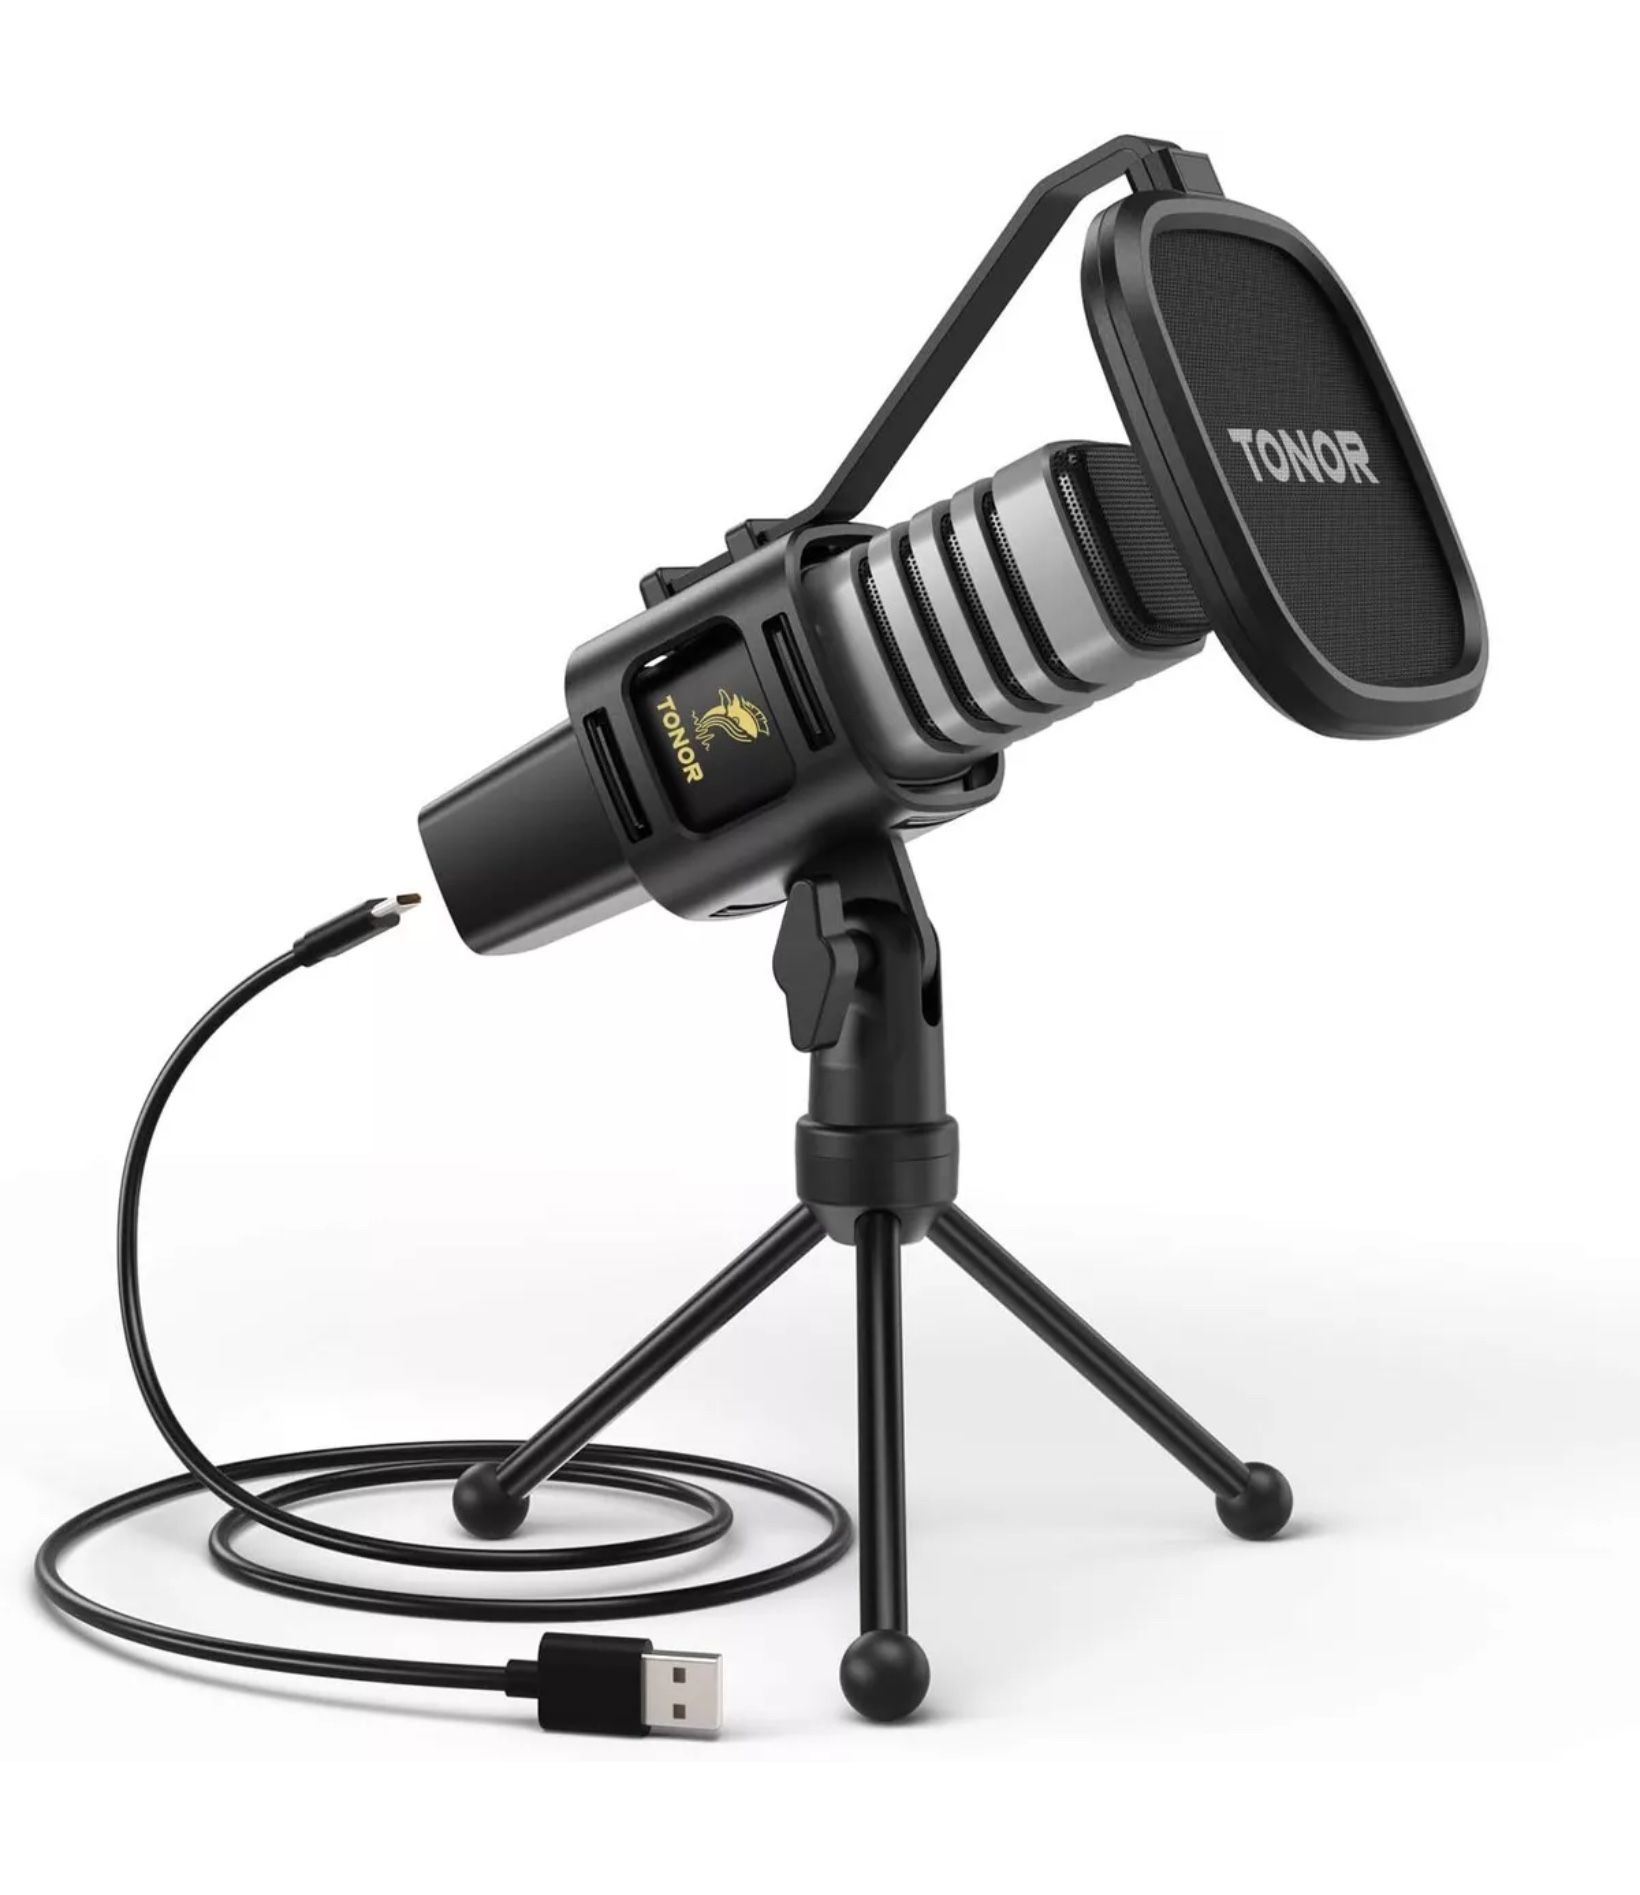 TONOR USB Microphone for PC with Tripod Stand, Pop Filter, Shock Mount, TC30